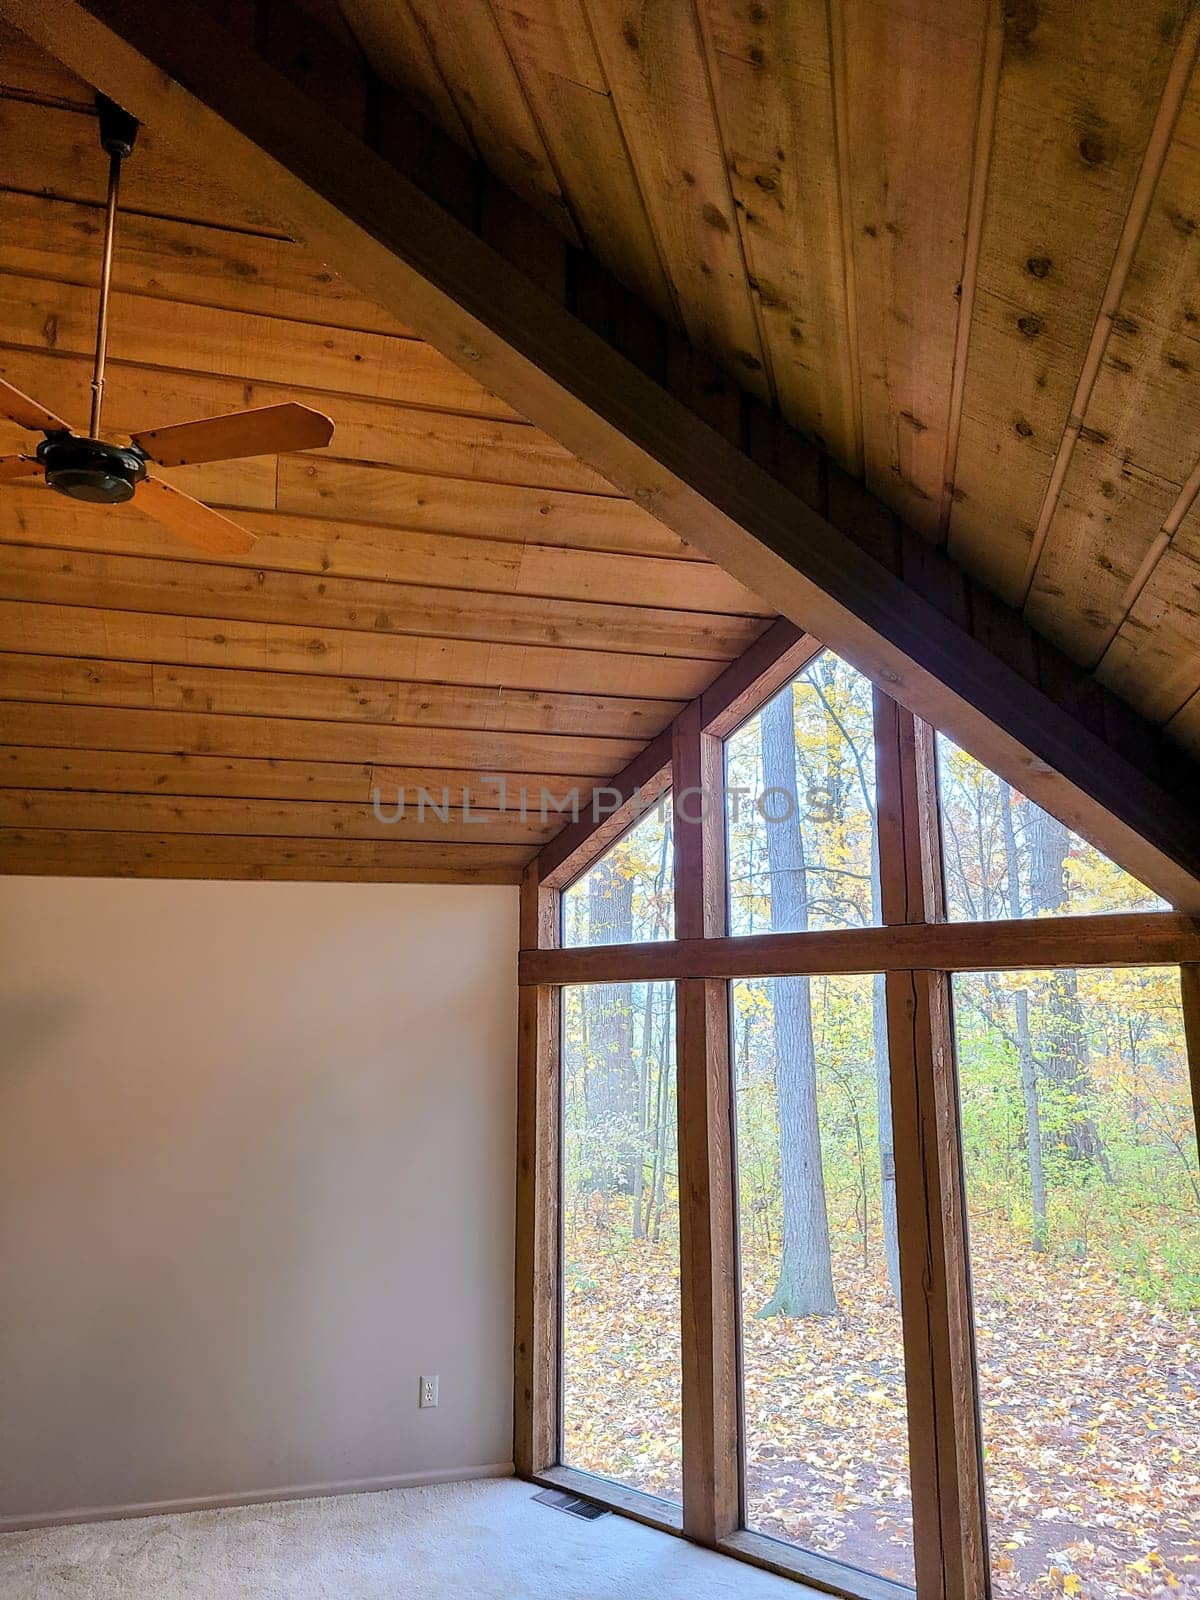 Rustic charm meets modern design in this 2021 Huntertown, Indiana home featuring exposed wooden beams and a panoramic view of an enchanting autumn forest.